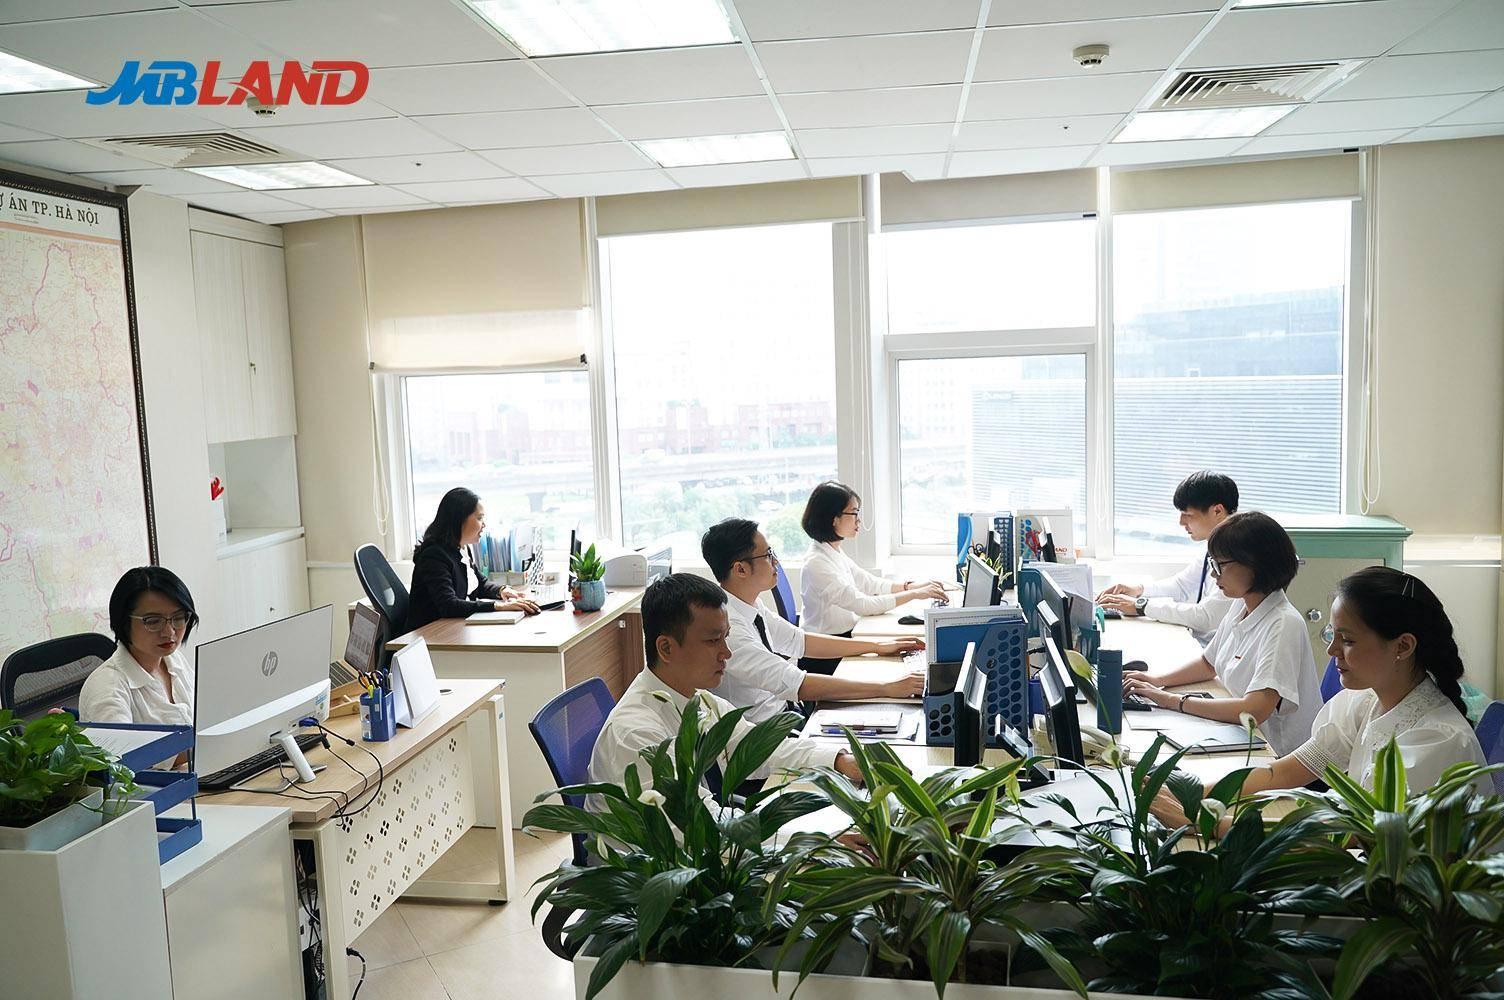 Tổng Công Ty Mbland - Mbland Holdings